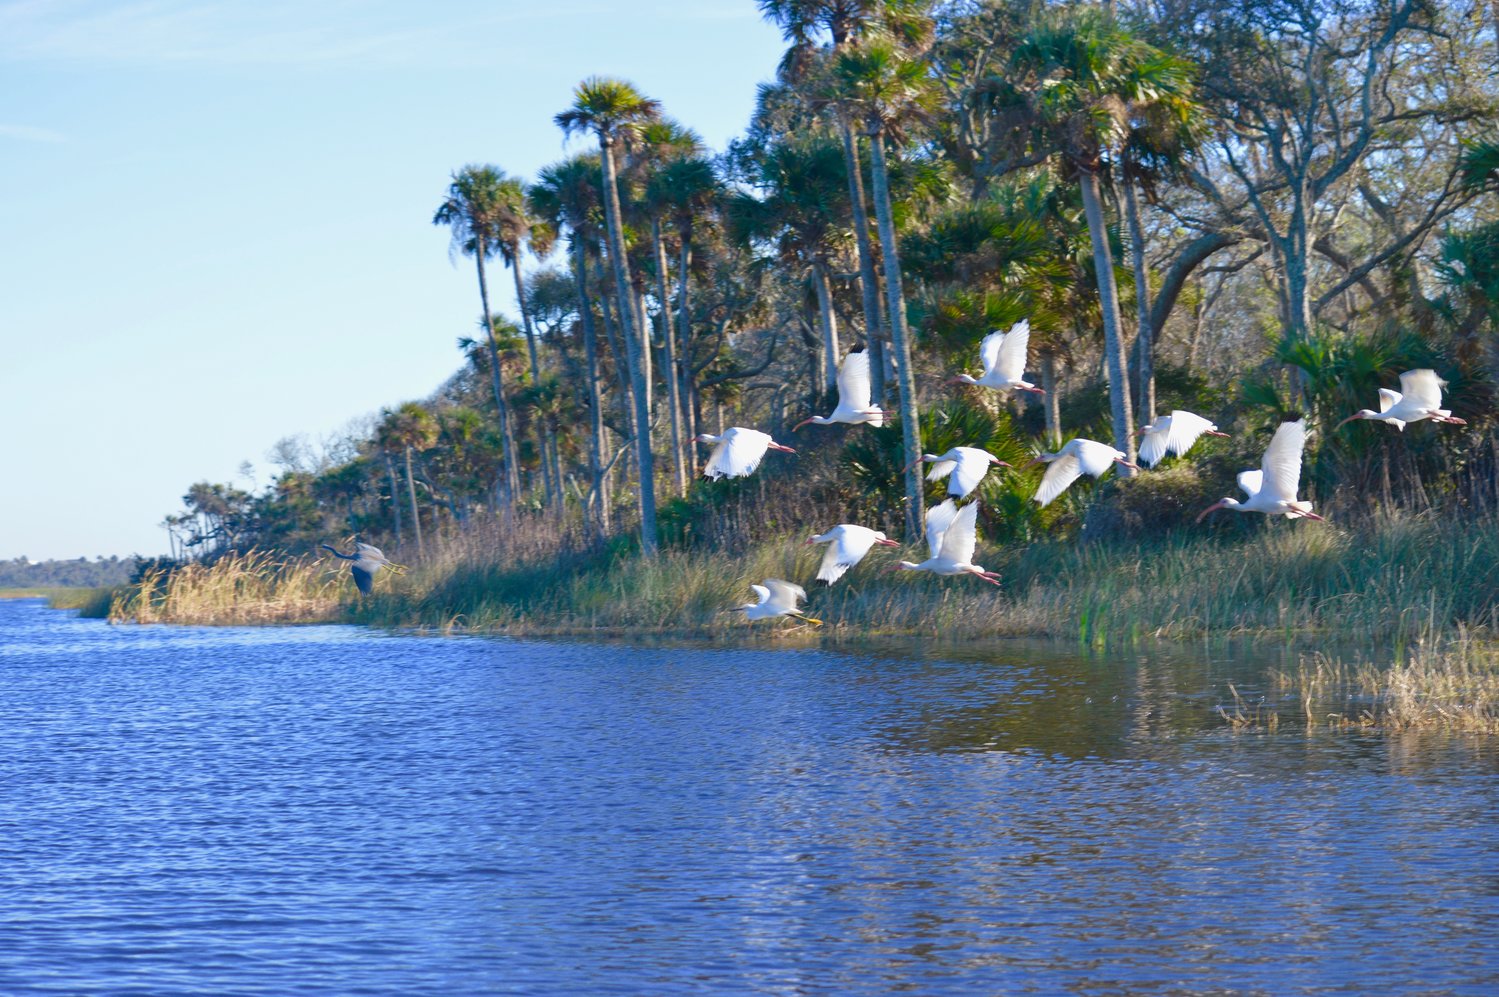 Ibis fly over Guana Lake near the Outpost in 2017.